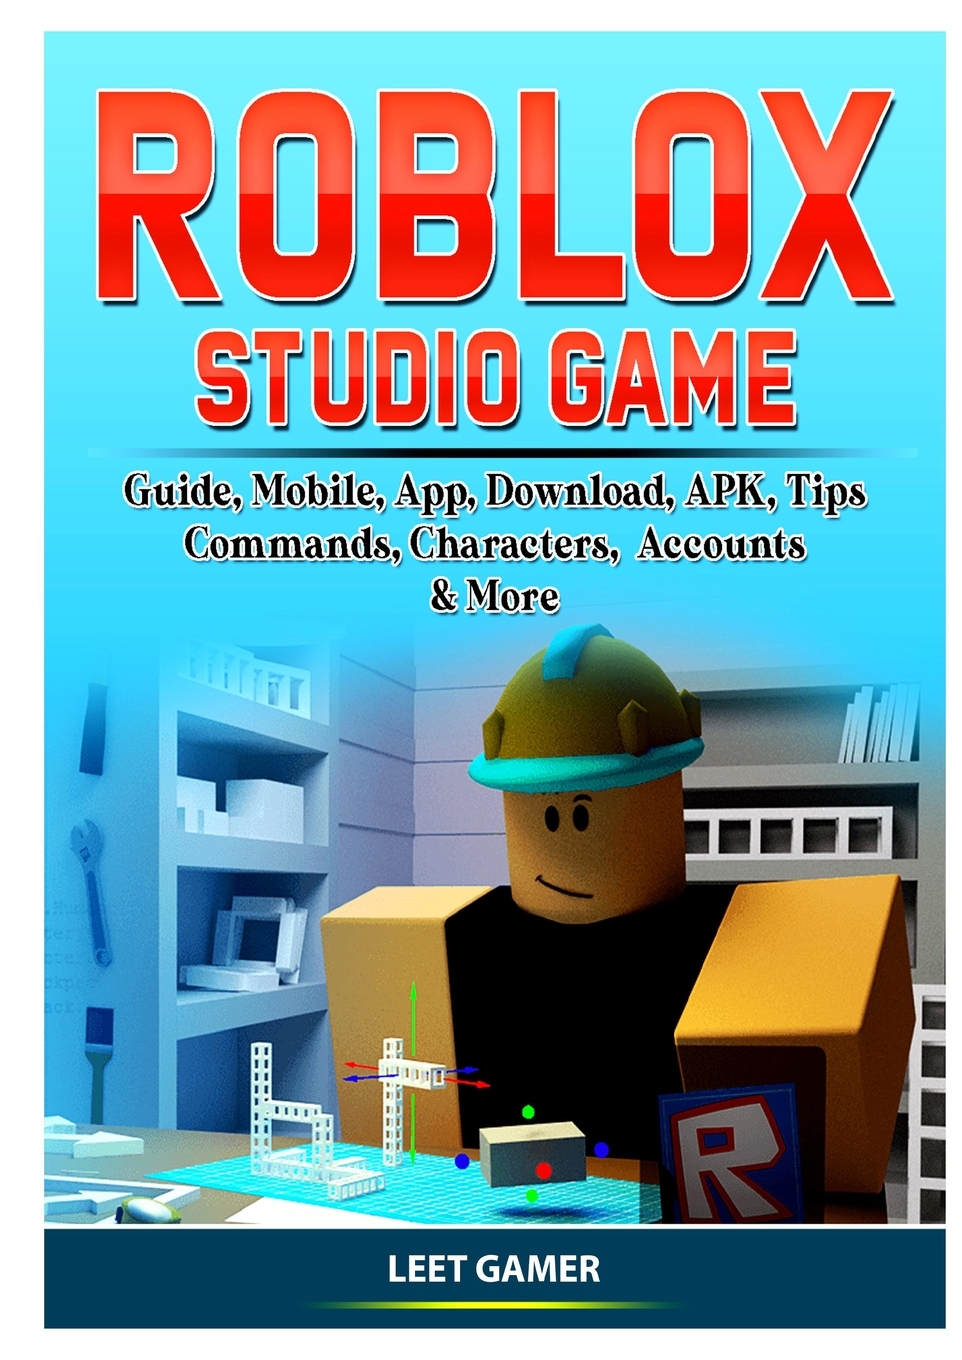 Roblox Studio Game Guide, Mobile, App, Download, APK, Tips, Commands,  Characters, Accounts, & More (Paperback)